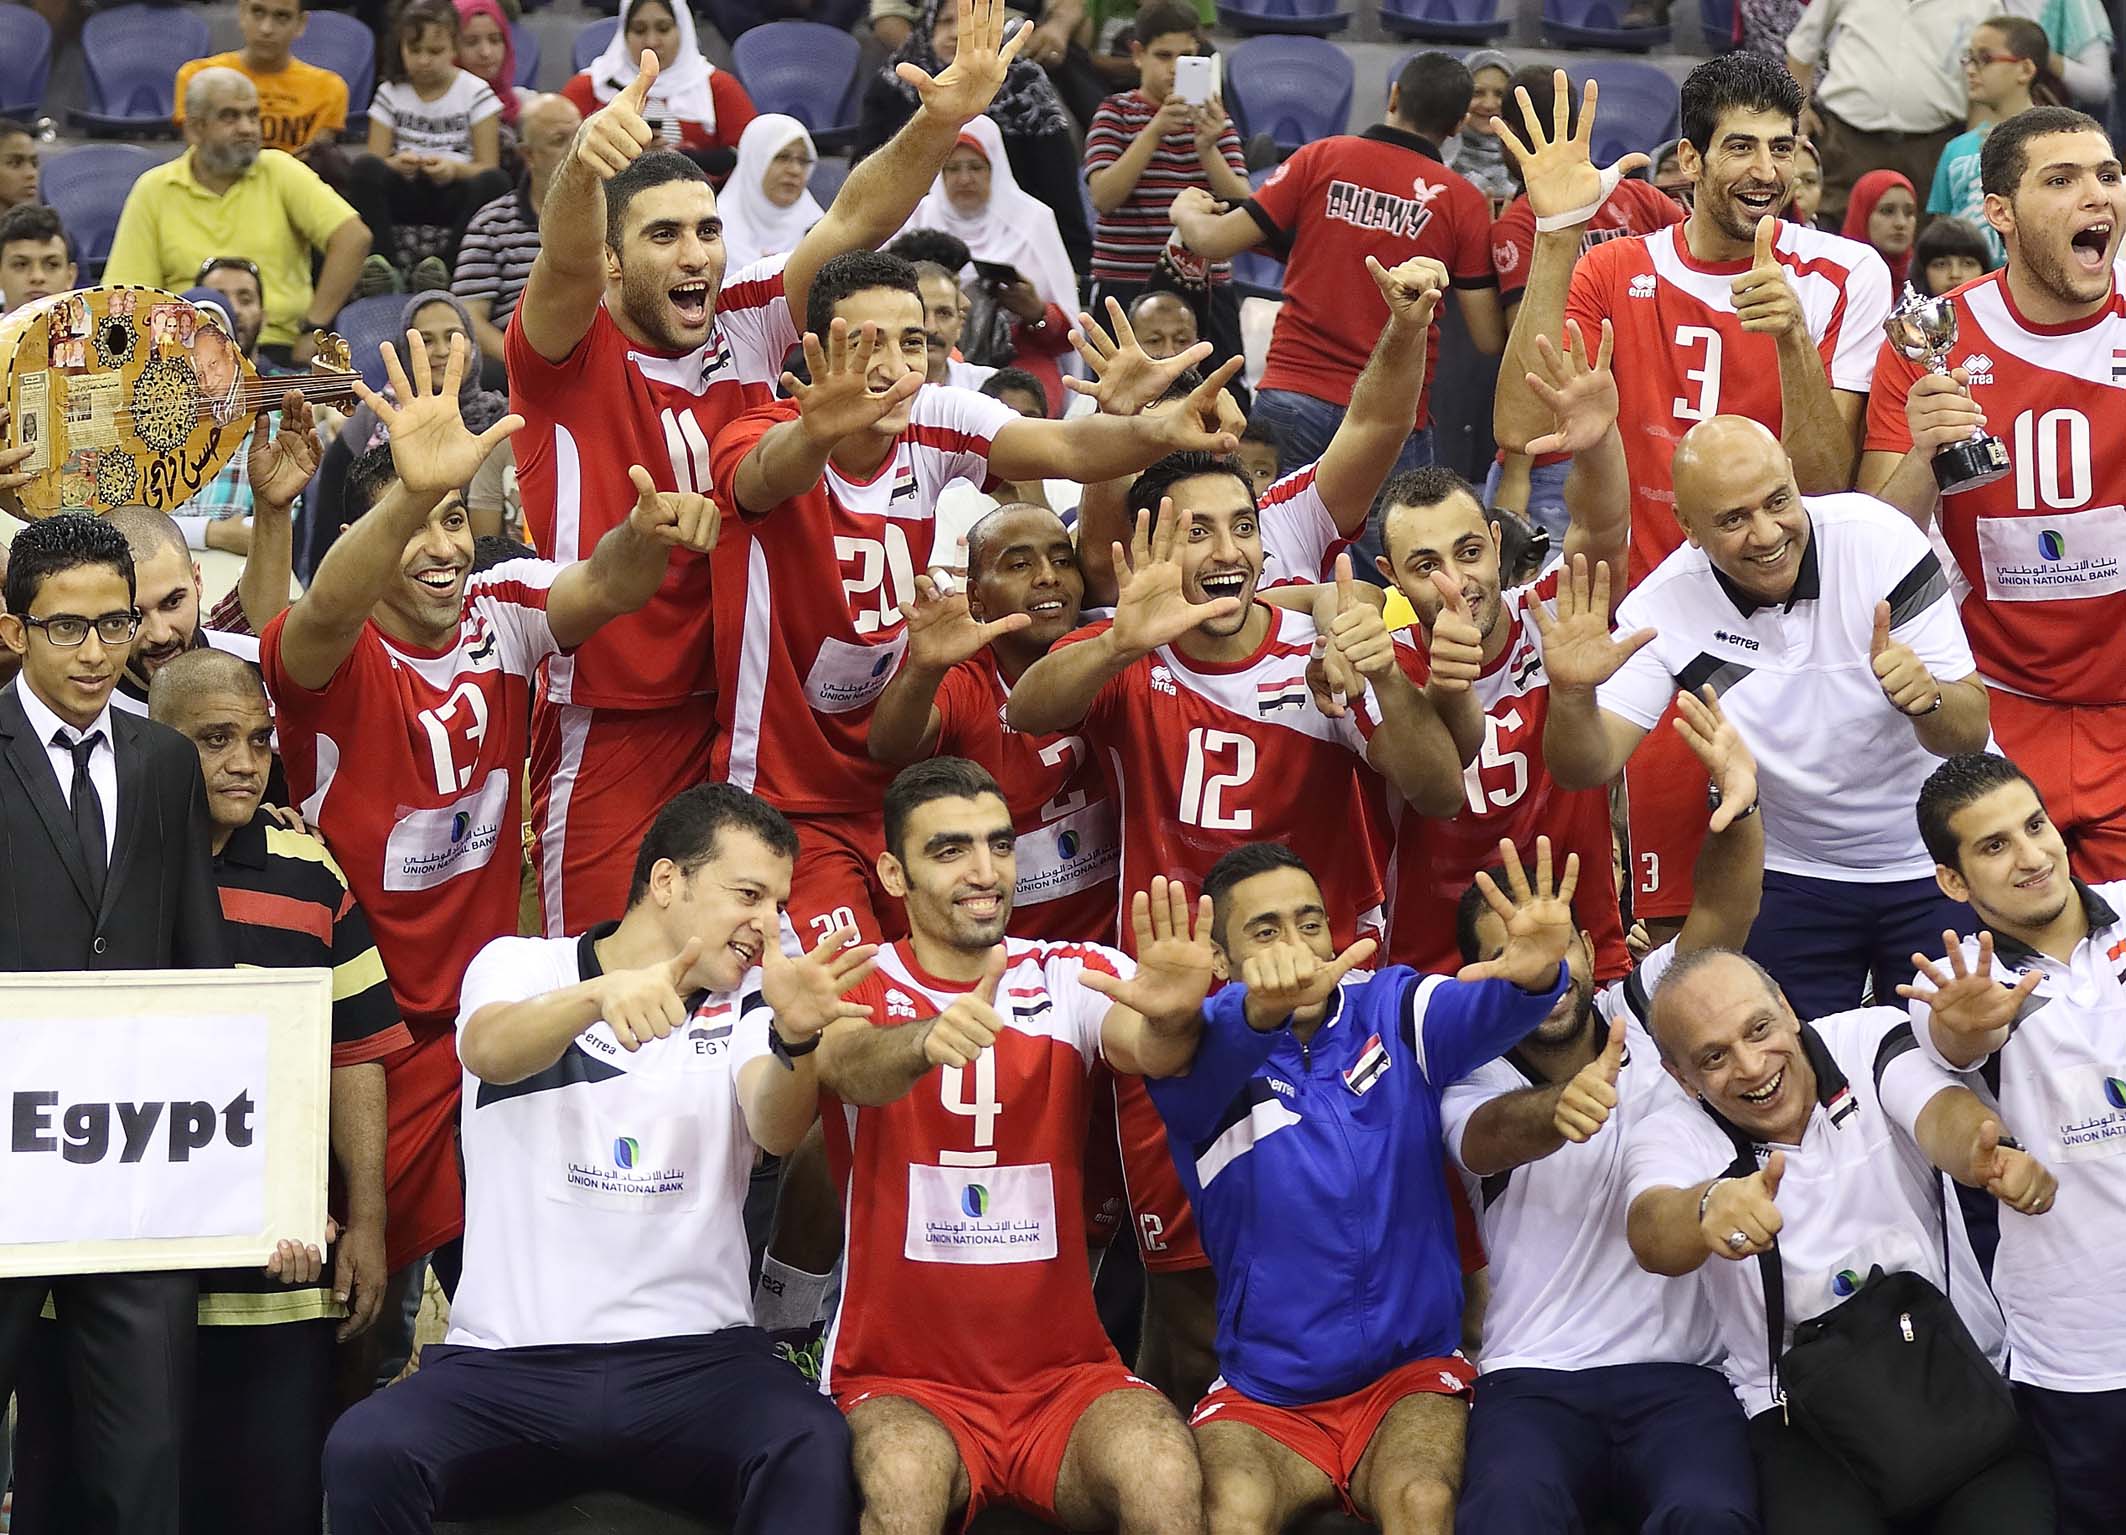 Egypt celebrates after clenching the African Cup. Credit: International Volleyball Federation